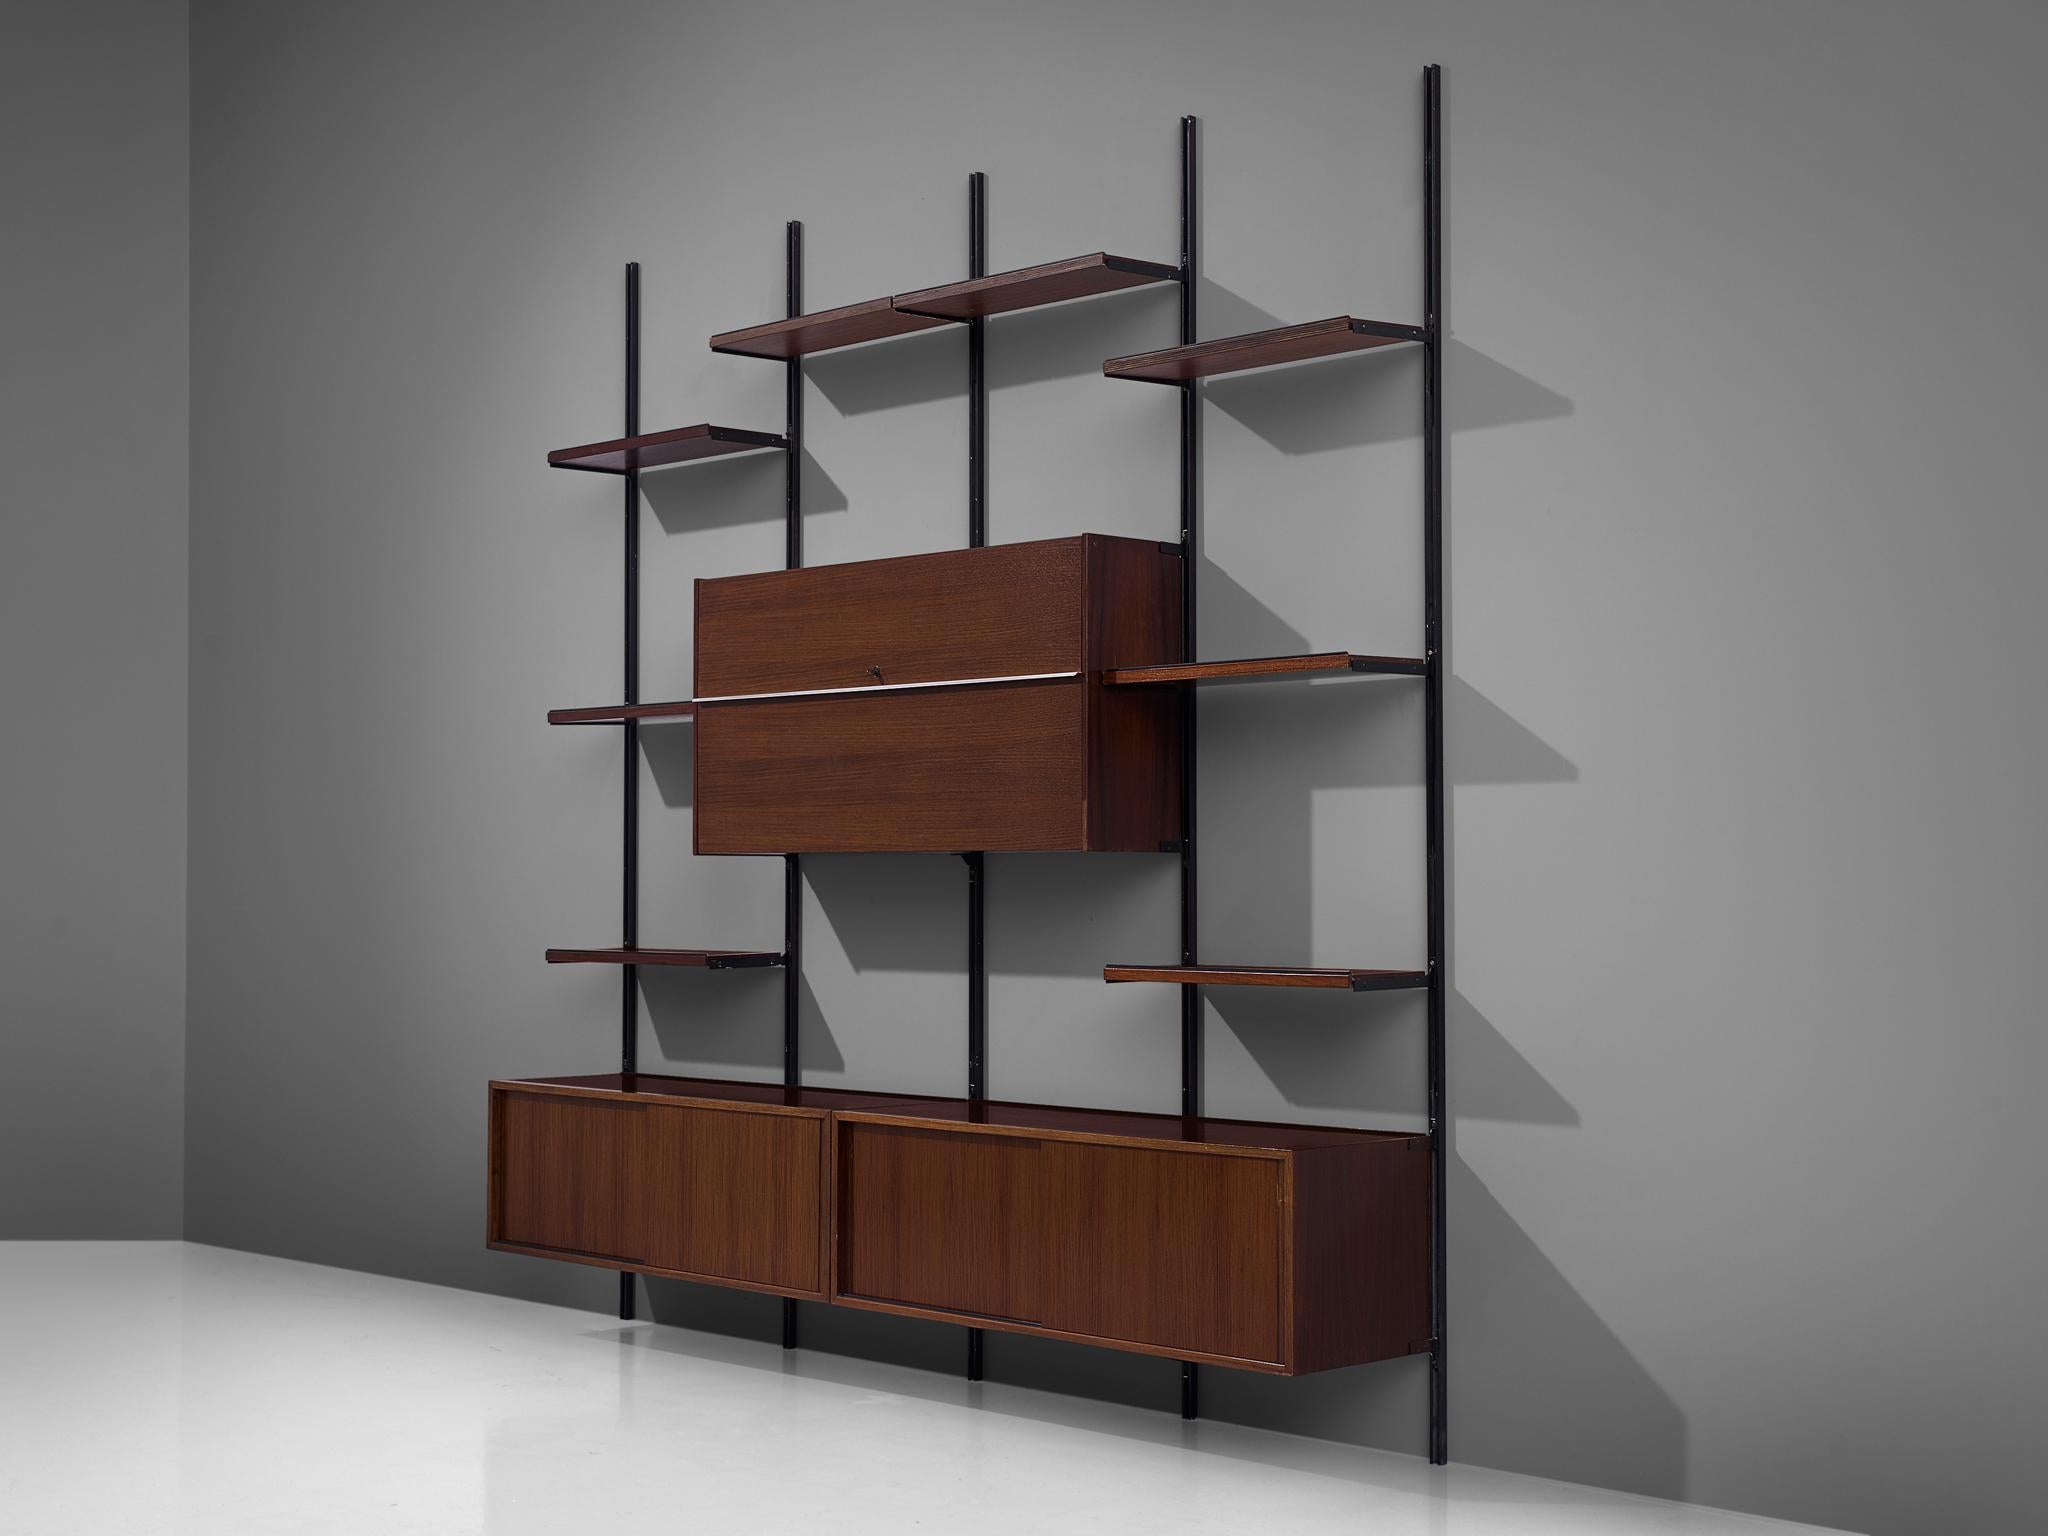 Osvaldo Borsani for Tecno, wall unit, metal and walnut, Italy, 1950s.

Modular shelving system designed by Osvaldo Borsani. The system was developed by Borsani as coordinated system for furnishing either the home or the office, the E22 is composed